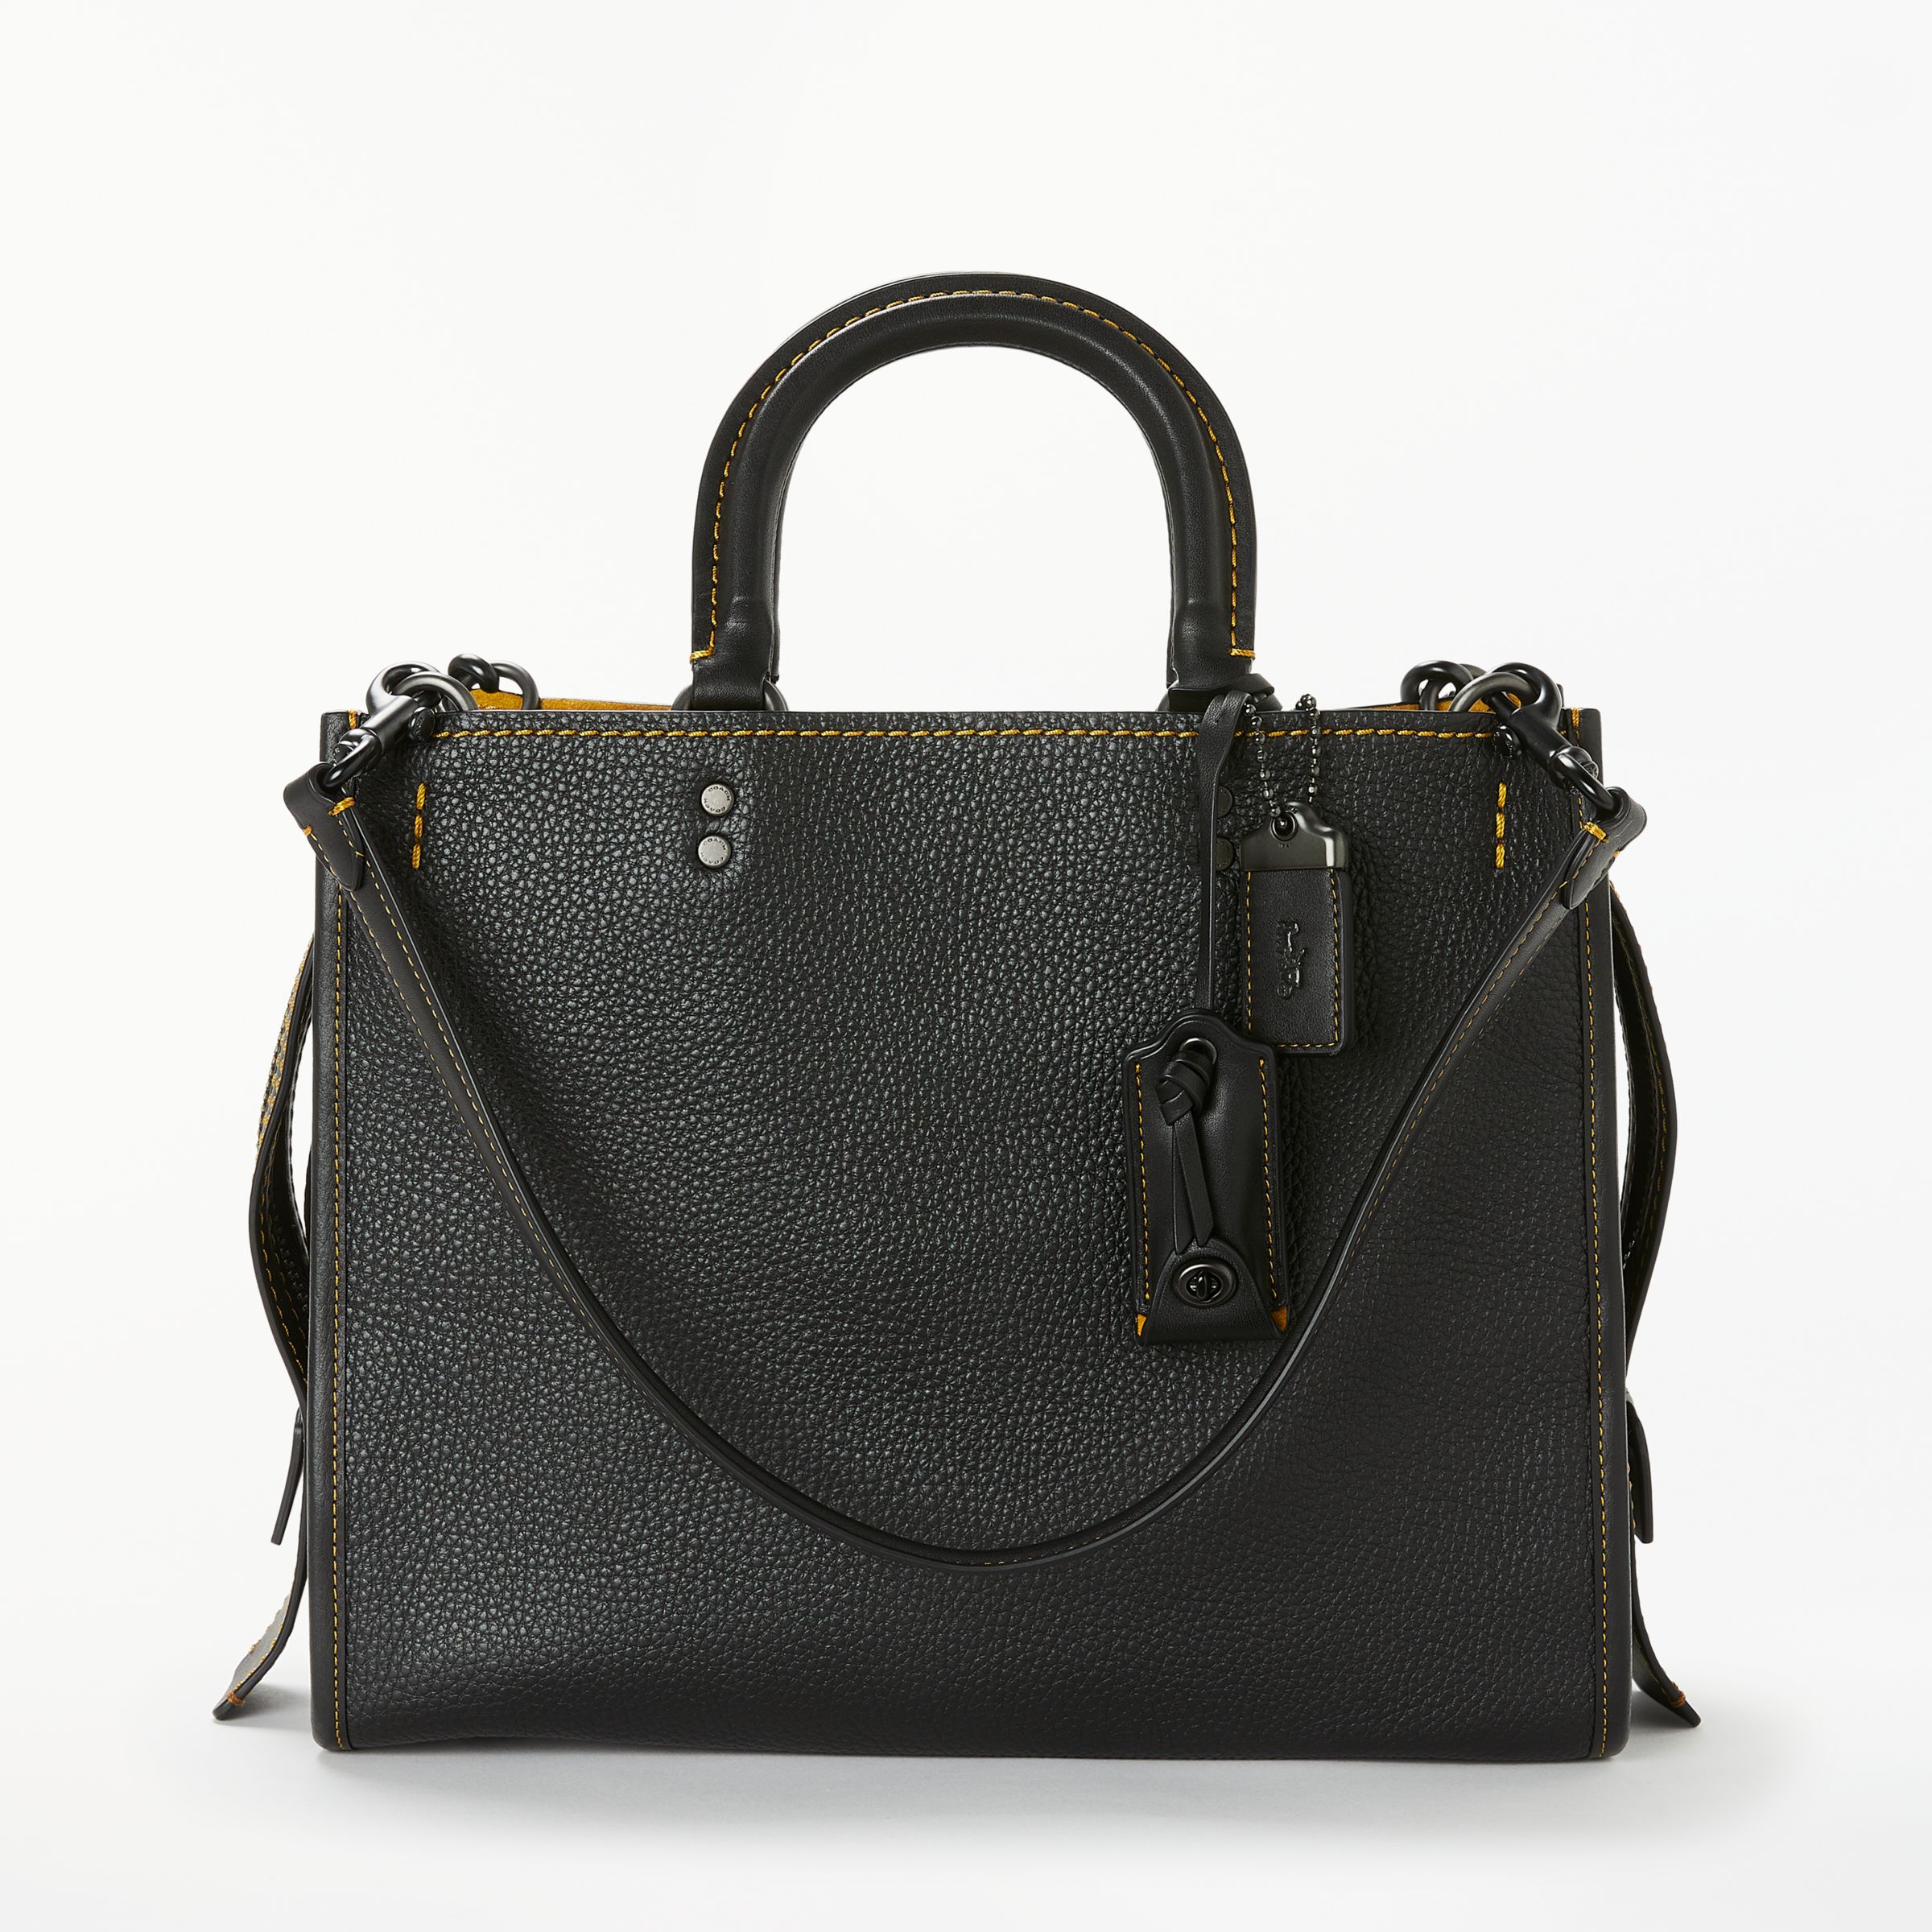 Coach Rogue Glovetanned Leather Bag, Black at John Lewis & Partners